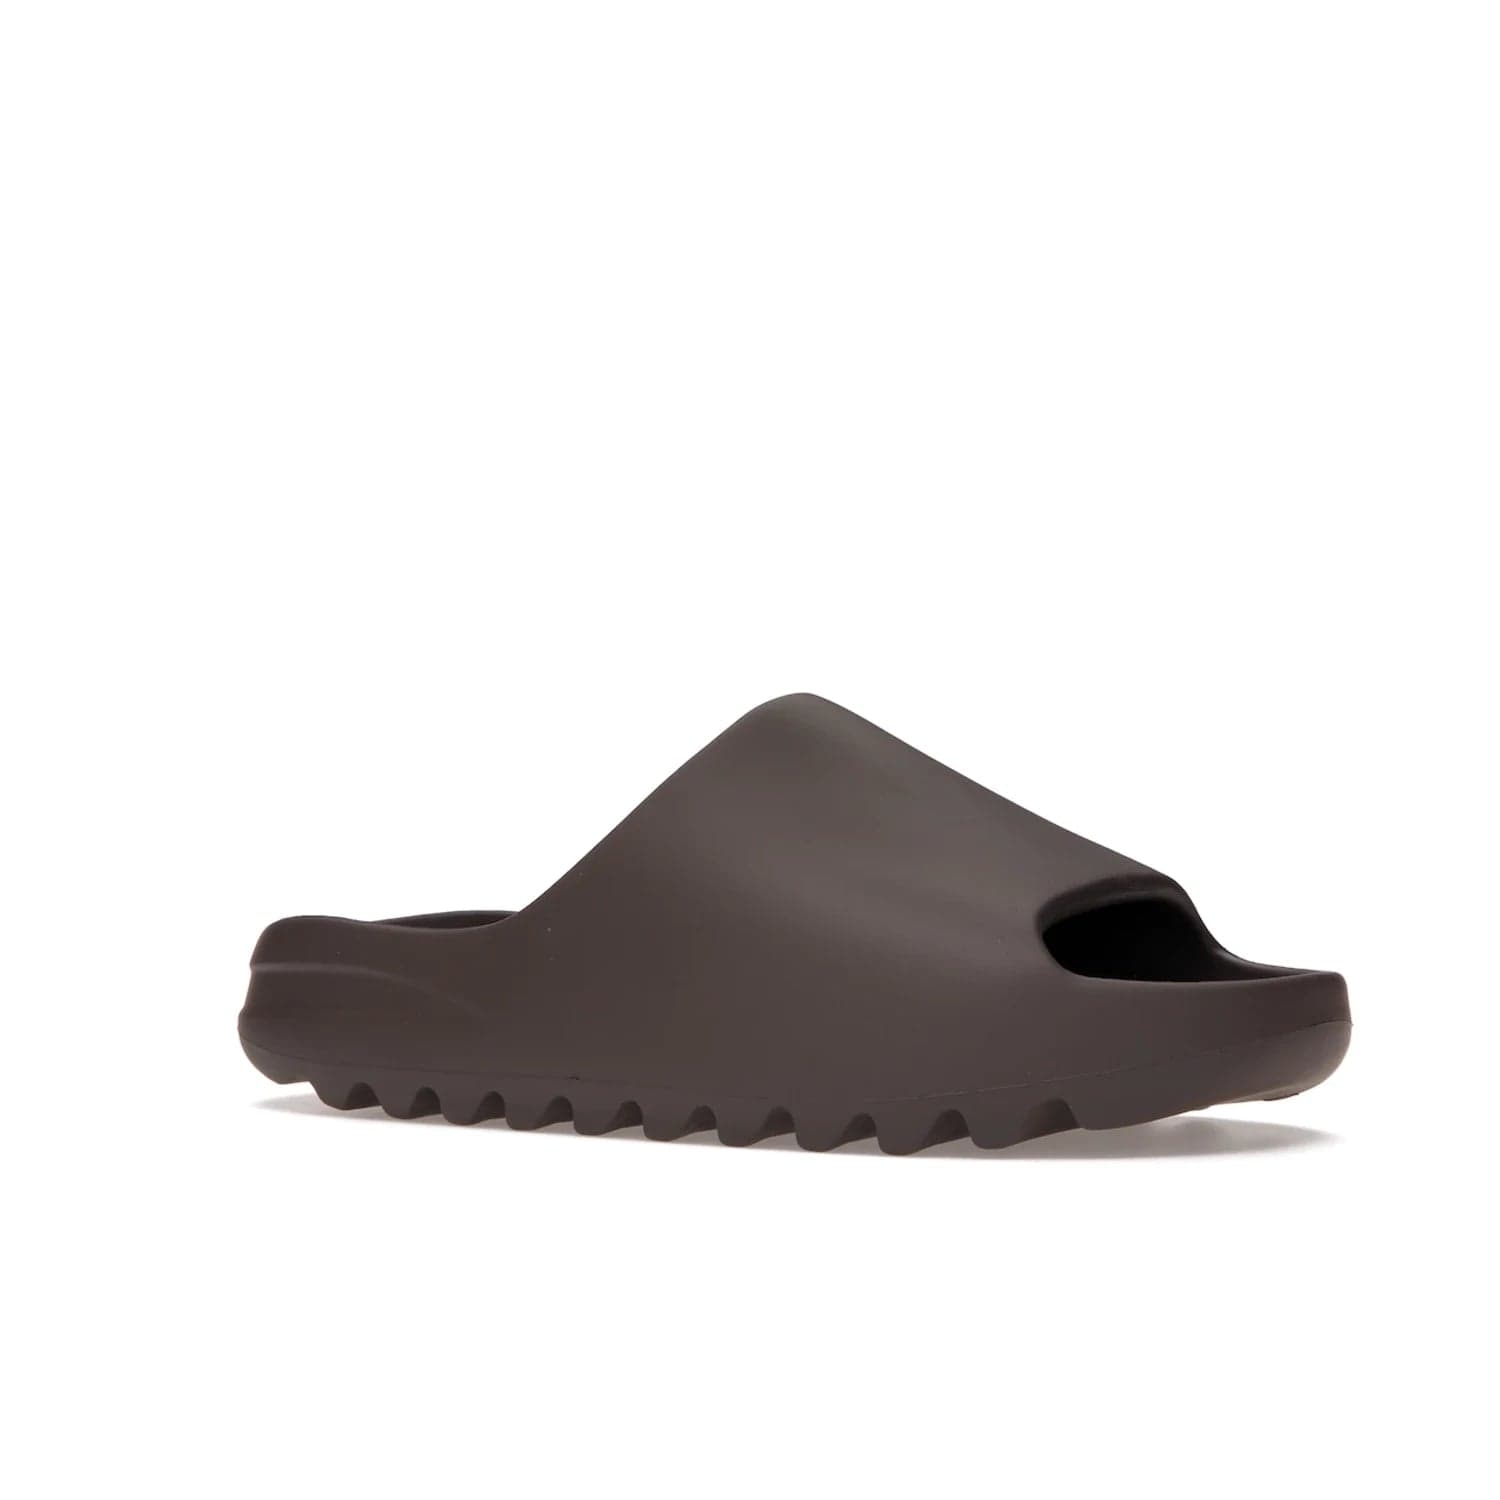 adidas Yeezy Slide Soot - Image 4 - Only at www.BallersClubKickz.com - Shop the Yeezy Slide Soot sneaker by Adidas, a sleek blend of form and function. Monochrome silhouette in Soot/Soot/Soot. Lightweight EVA foam offers comfort and durability. Get the must-have style today.